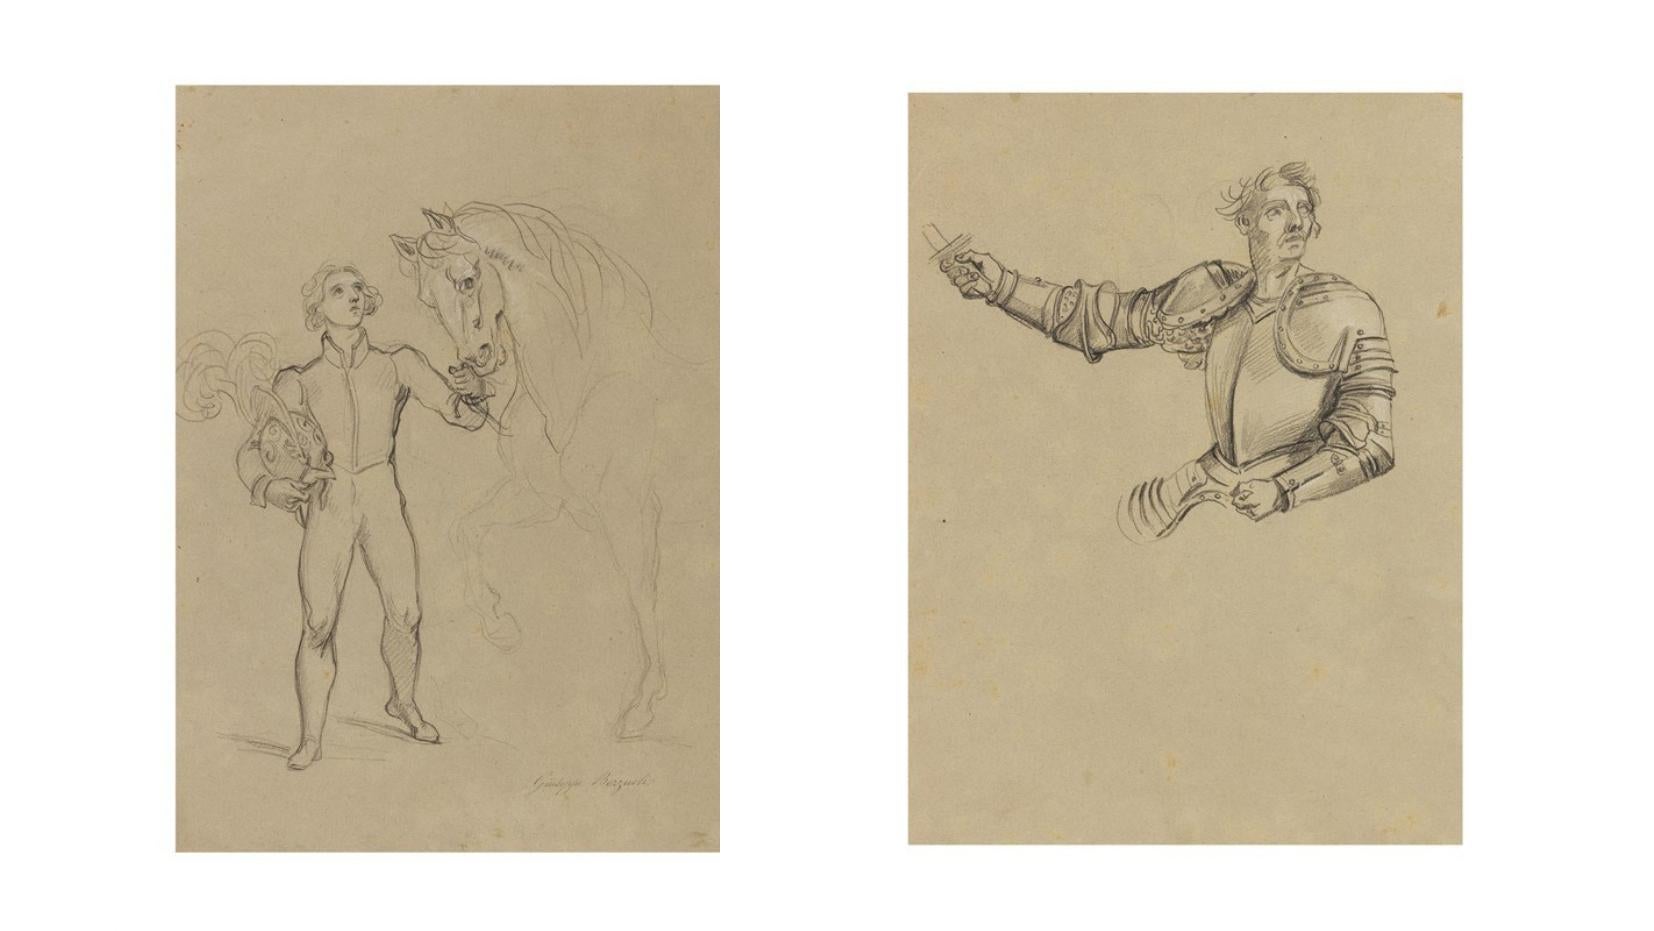 GIUSEPPE BEZZUOLI (Florence 1784 -1855), Studies for the painting "Charles 8th of France entering in Florence", 1827-1828, pencil on paper, 31 x 22 cm; signed Giuseppe Bezzuoli at the bottom right.
Fronte: study for the page boy holding the